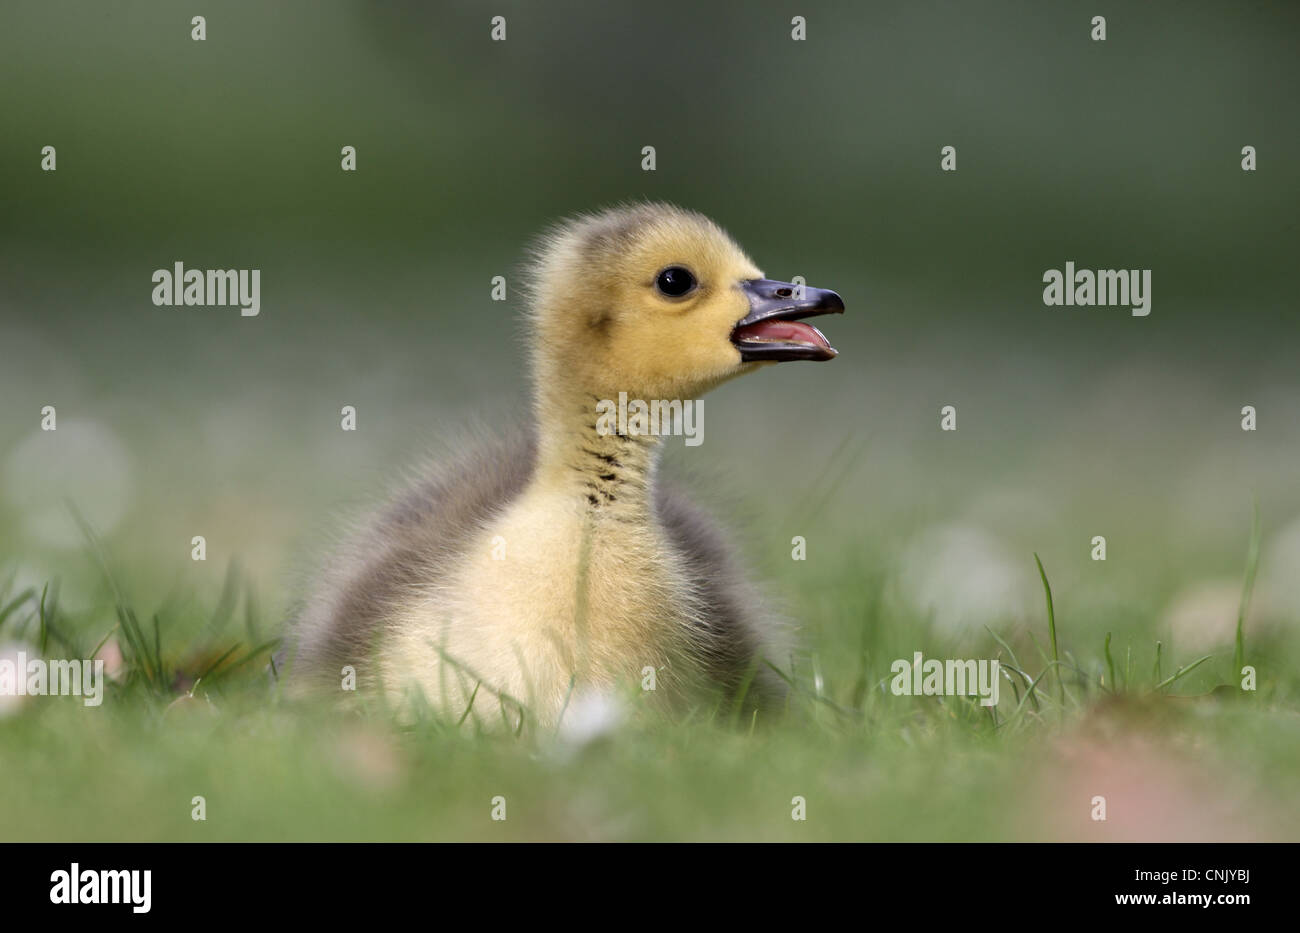 Canada Goose (Branta canadensis) introduced species, gosling, calling, sitting on grass, London, England, may Stock Photo